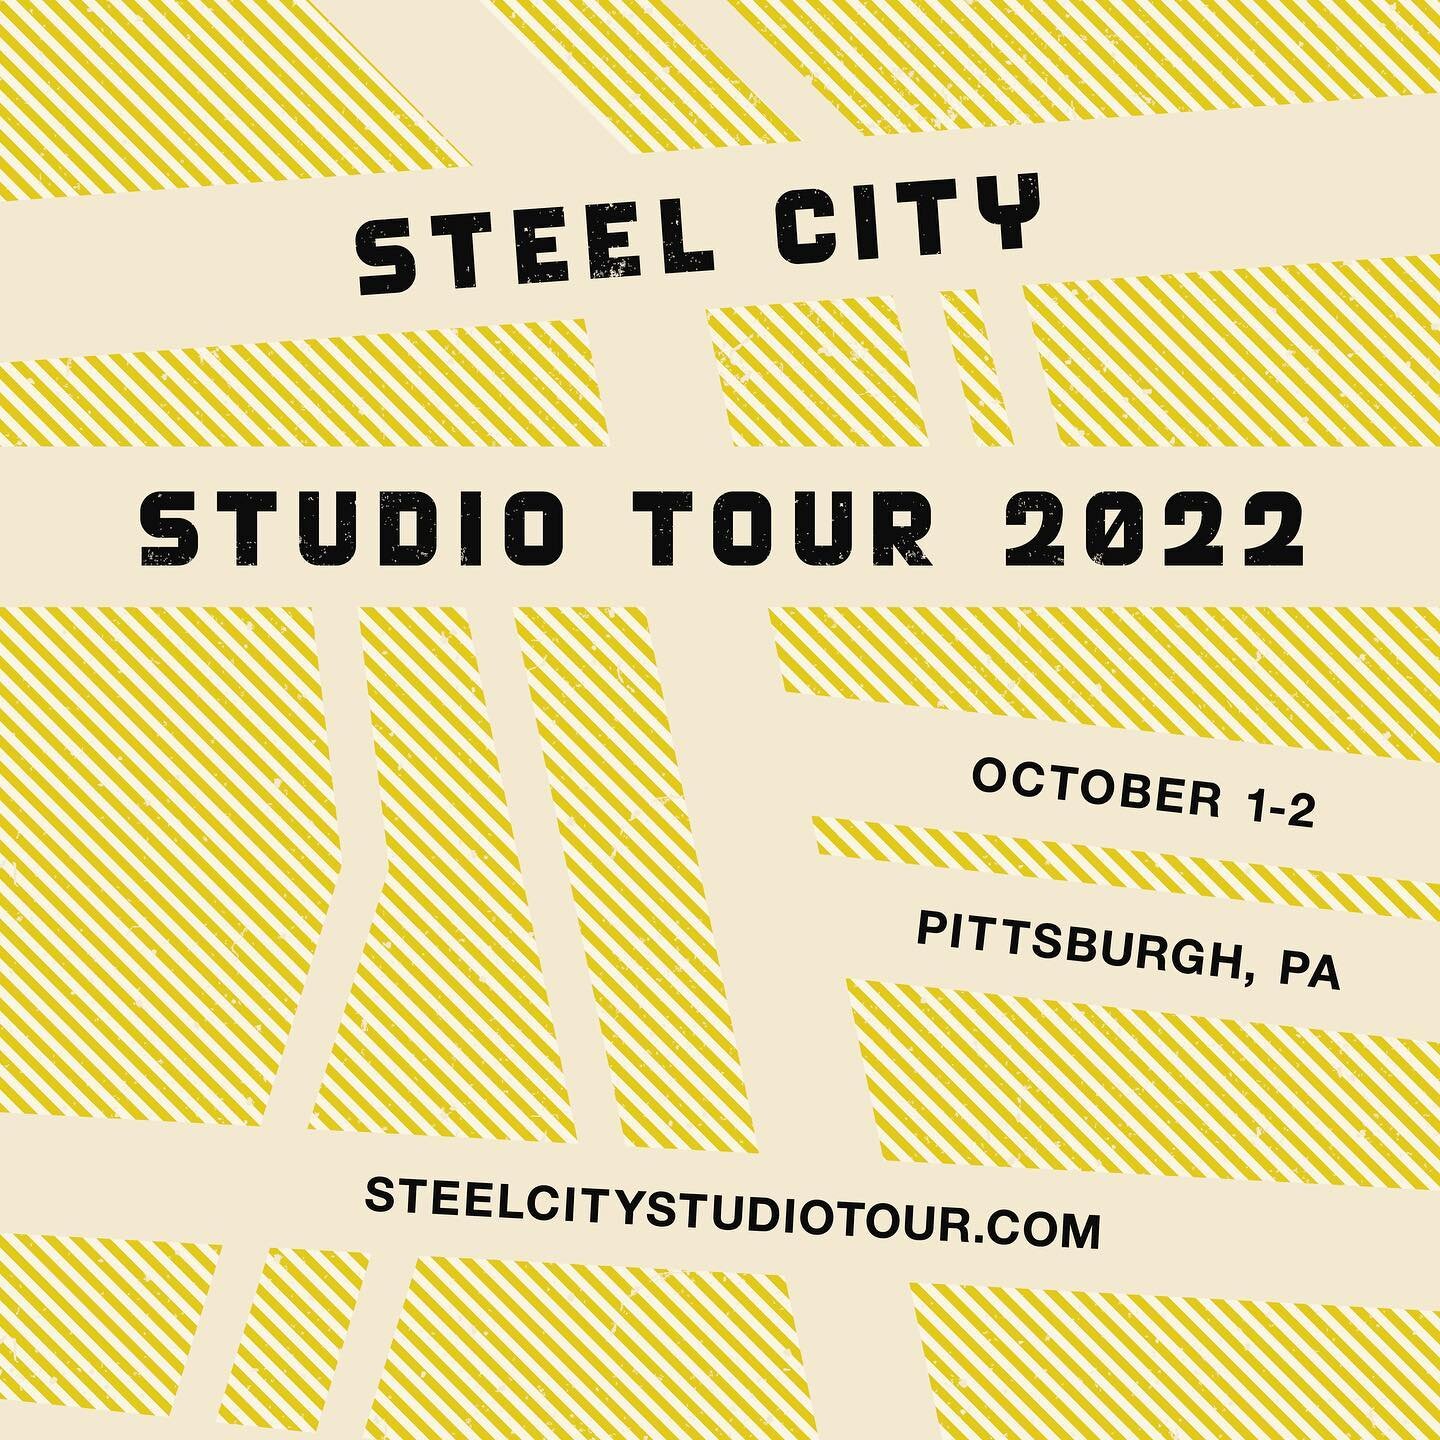 Save the date! We will be participating in the @steelcitystudiotour Oct 1-2! 
Our studio doors will be open along with many other talented local ceramicists throughout the East End. 
More details to come!